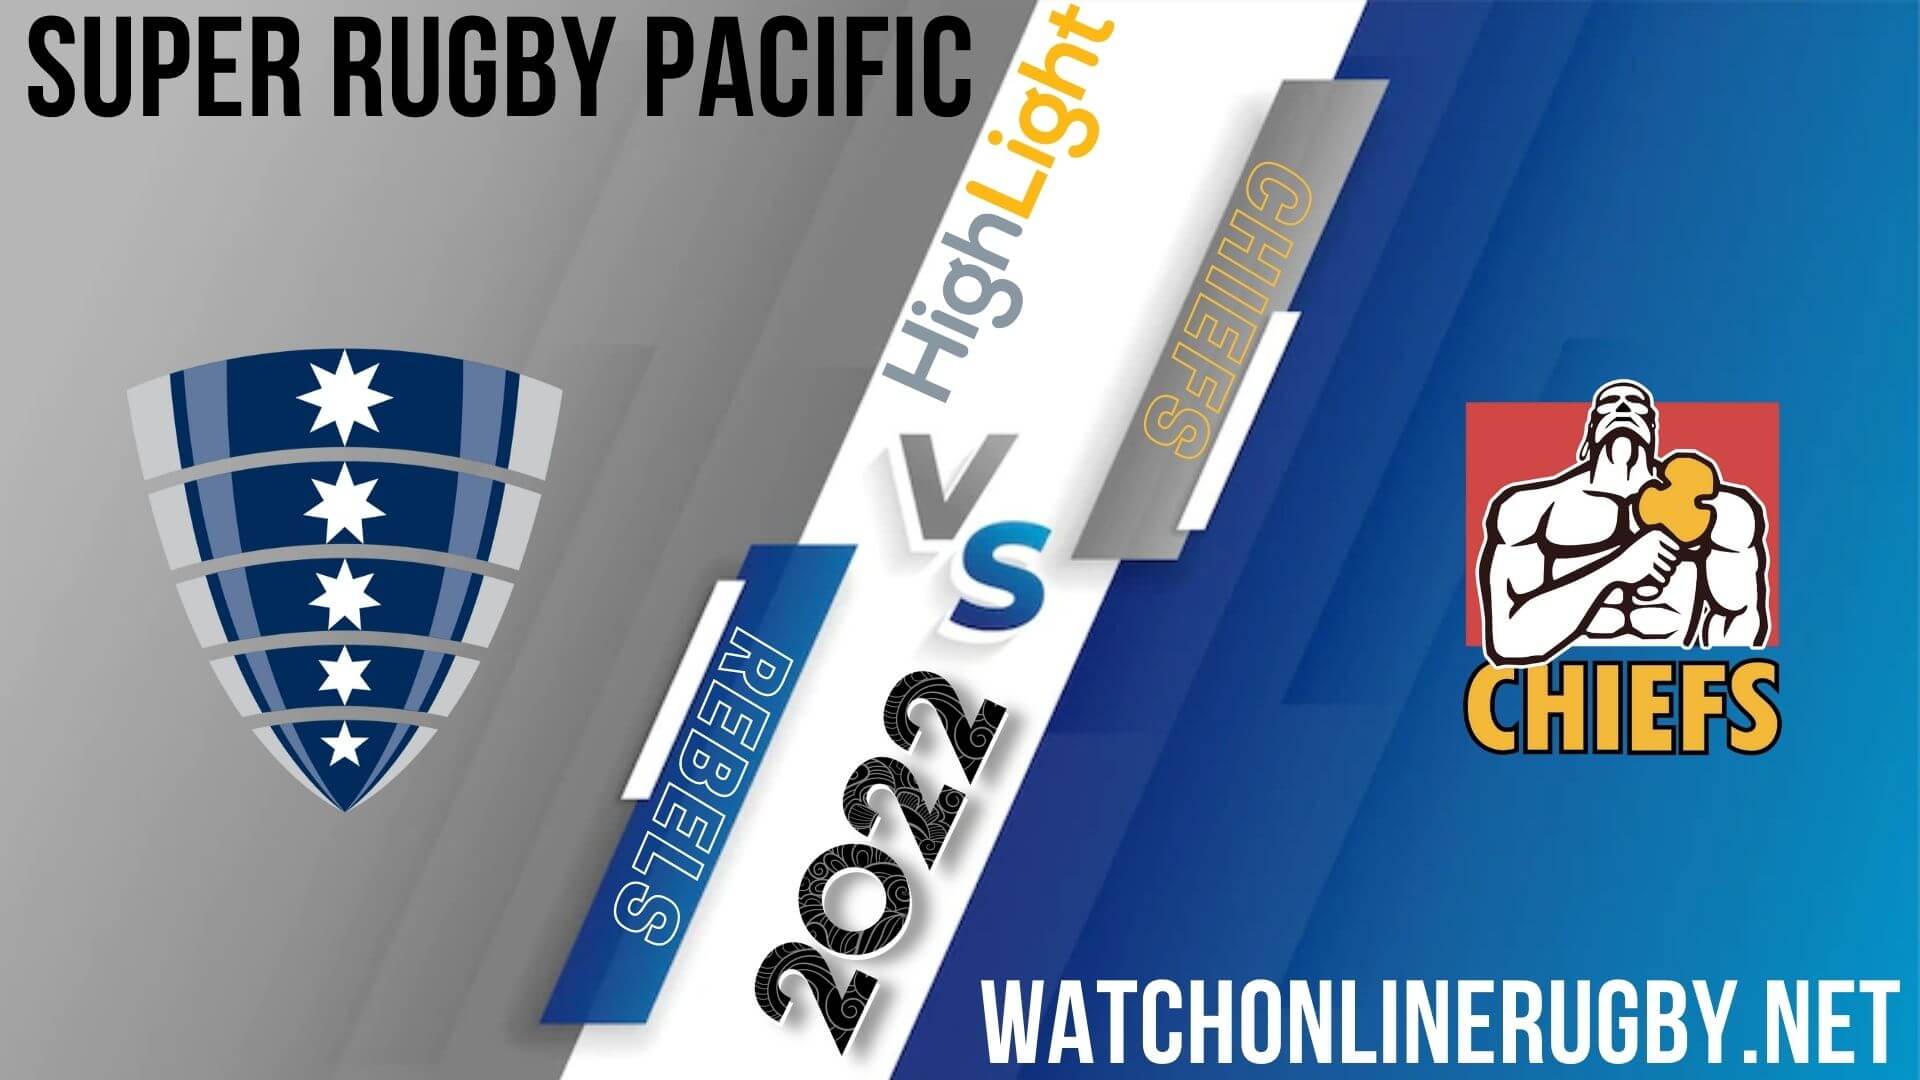 Rebels Vs Chiefs Super Rugby Pacific 2022 RD 13